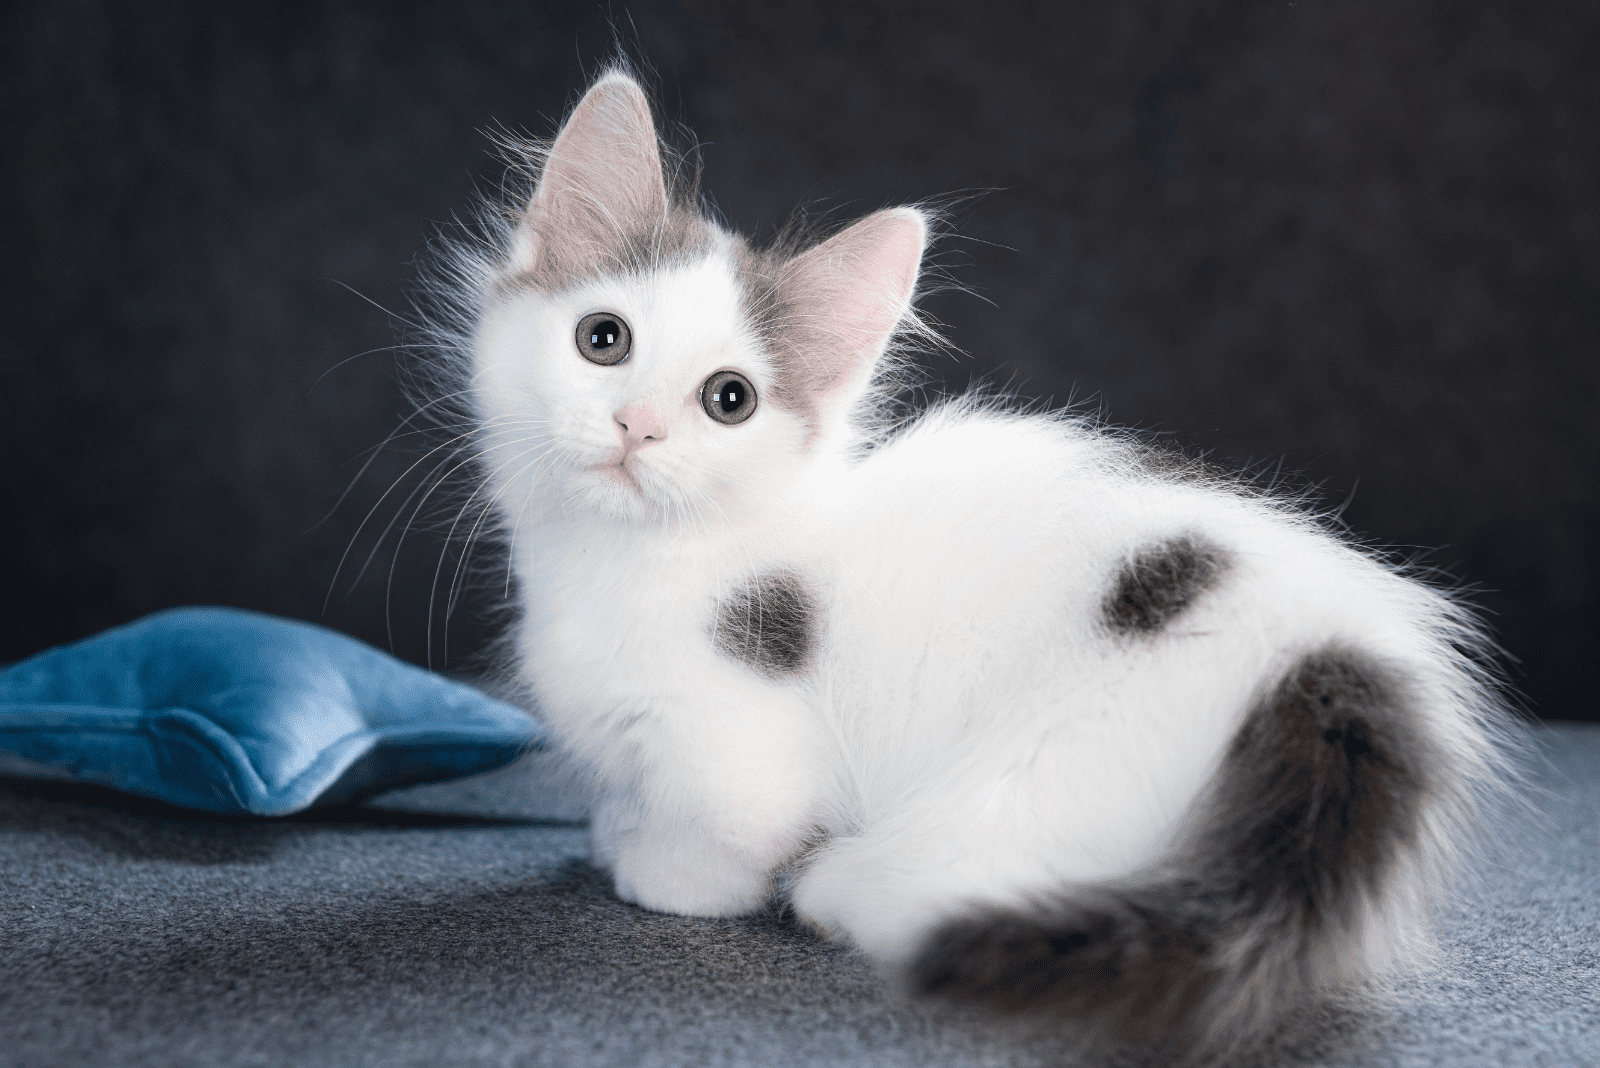 Munchkin Kittens sitting and looking at the camera